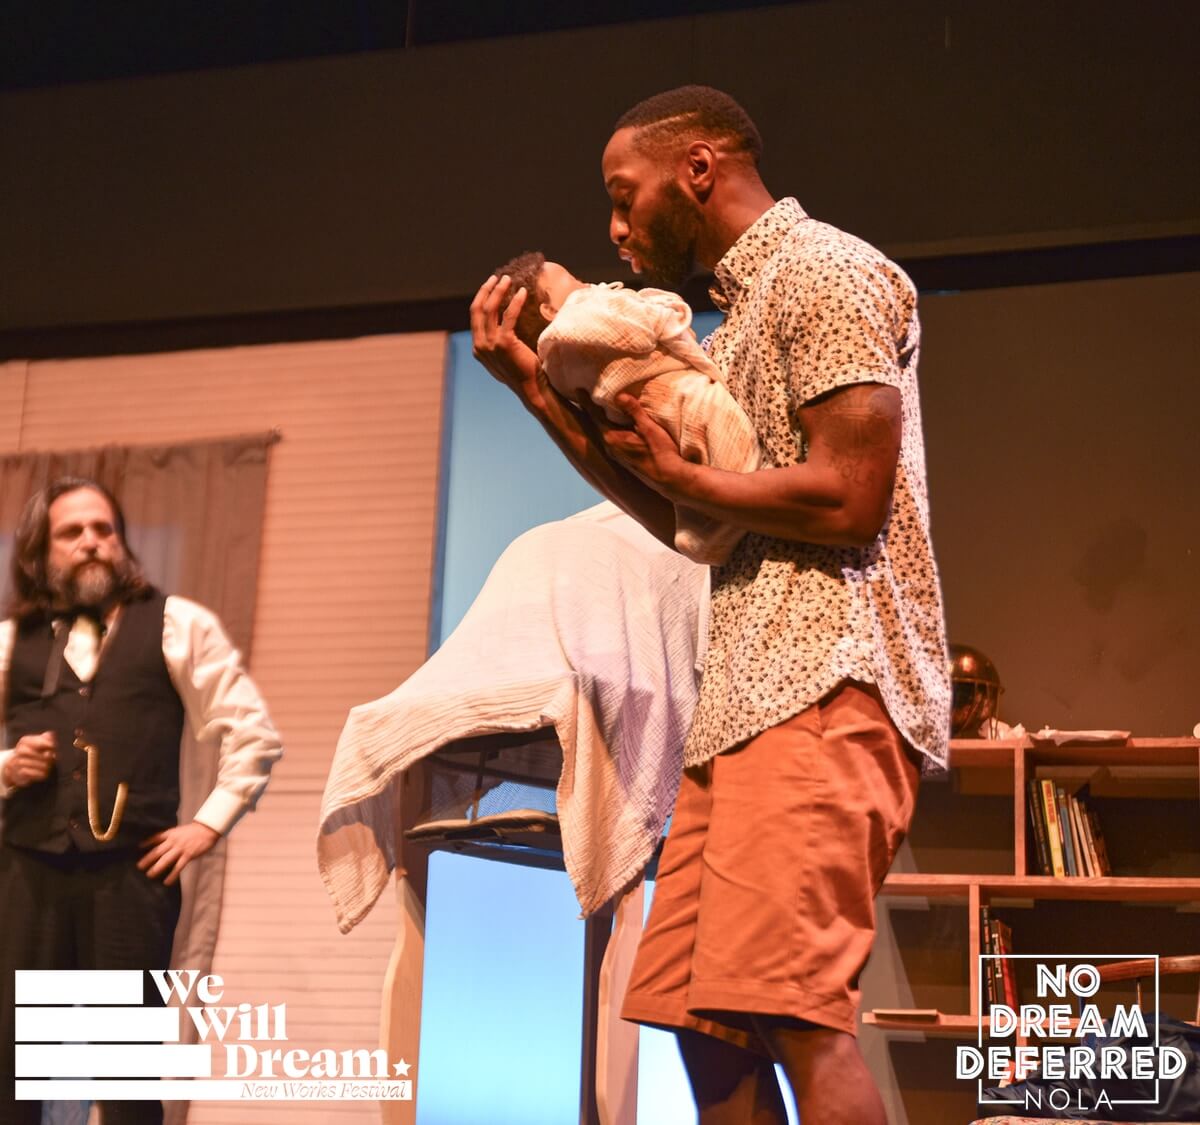 In a living room, A young Black man wearing a light blue button-up shirt and golden orange shorts, holds his small baby, while the ghost of abolitionist JOHN BROWN, portrayed by a White man, with a full beard and shoulder-length hair, wearing a black vest, white collared shirt, and black pants, visits behind him, in the wonder of the small child. 